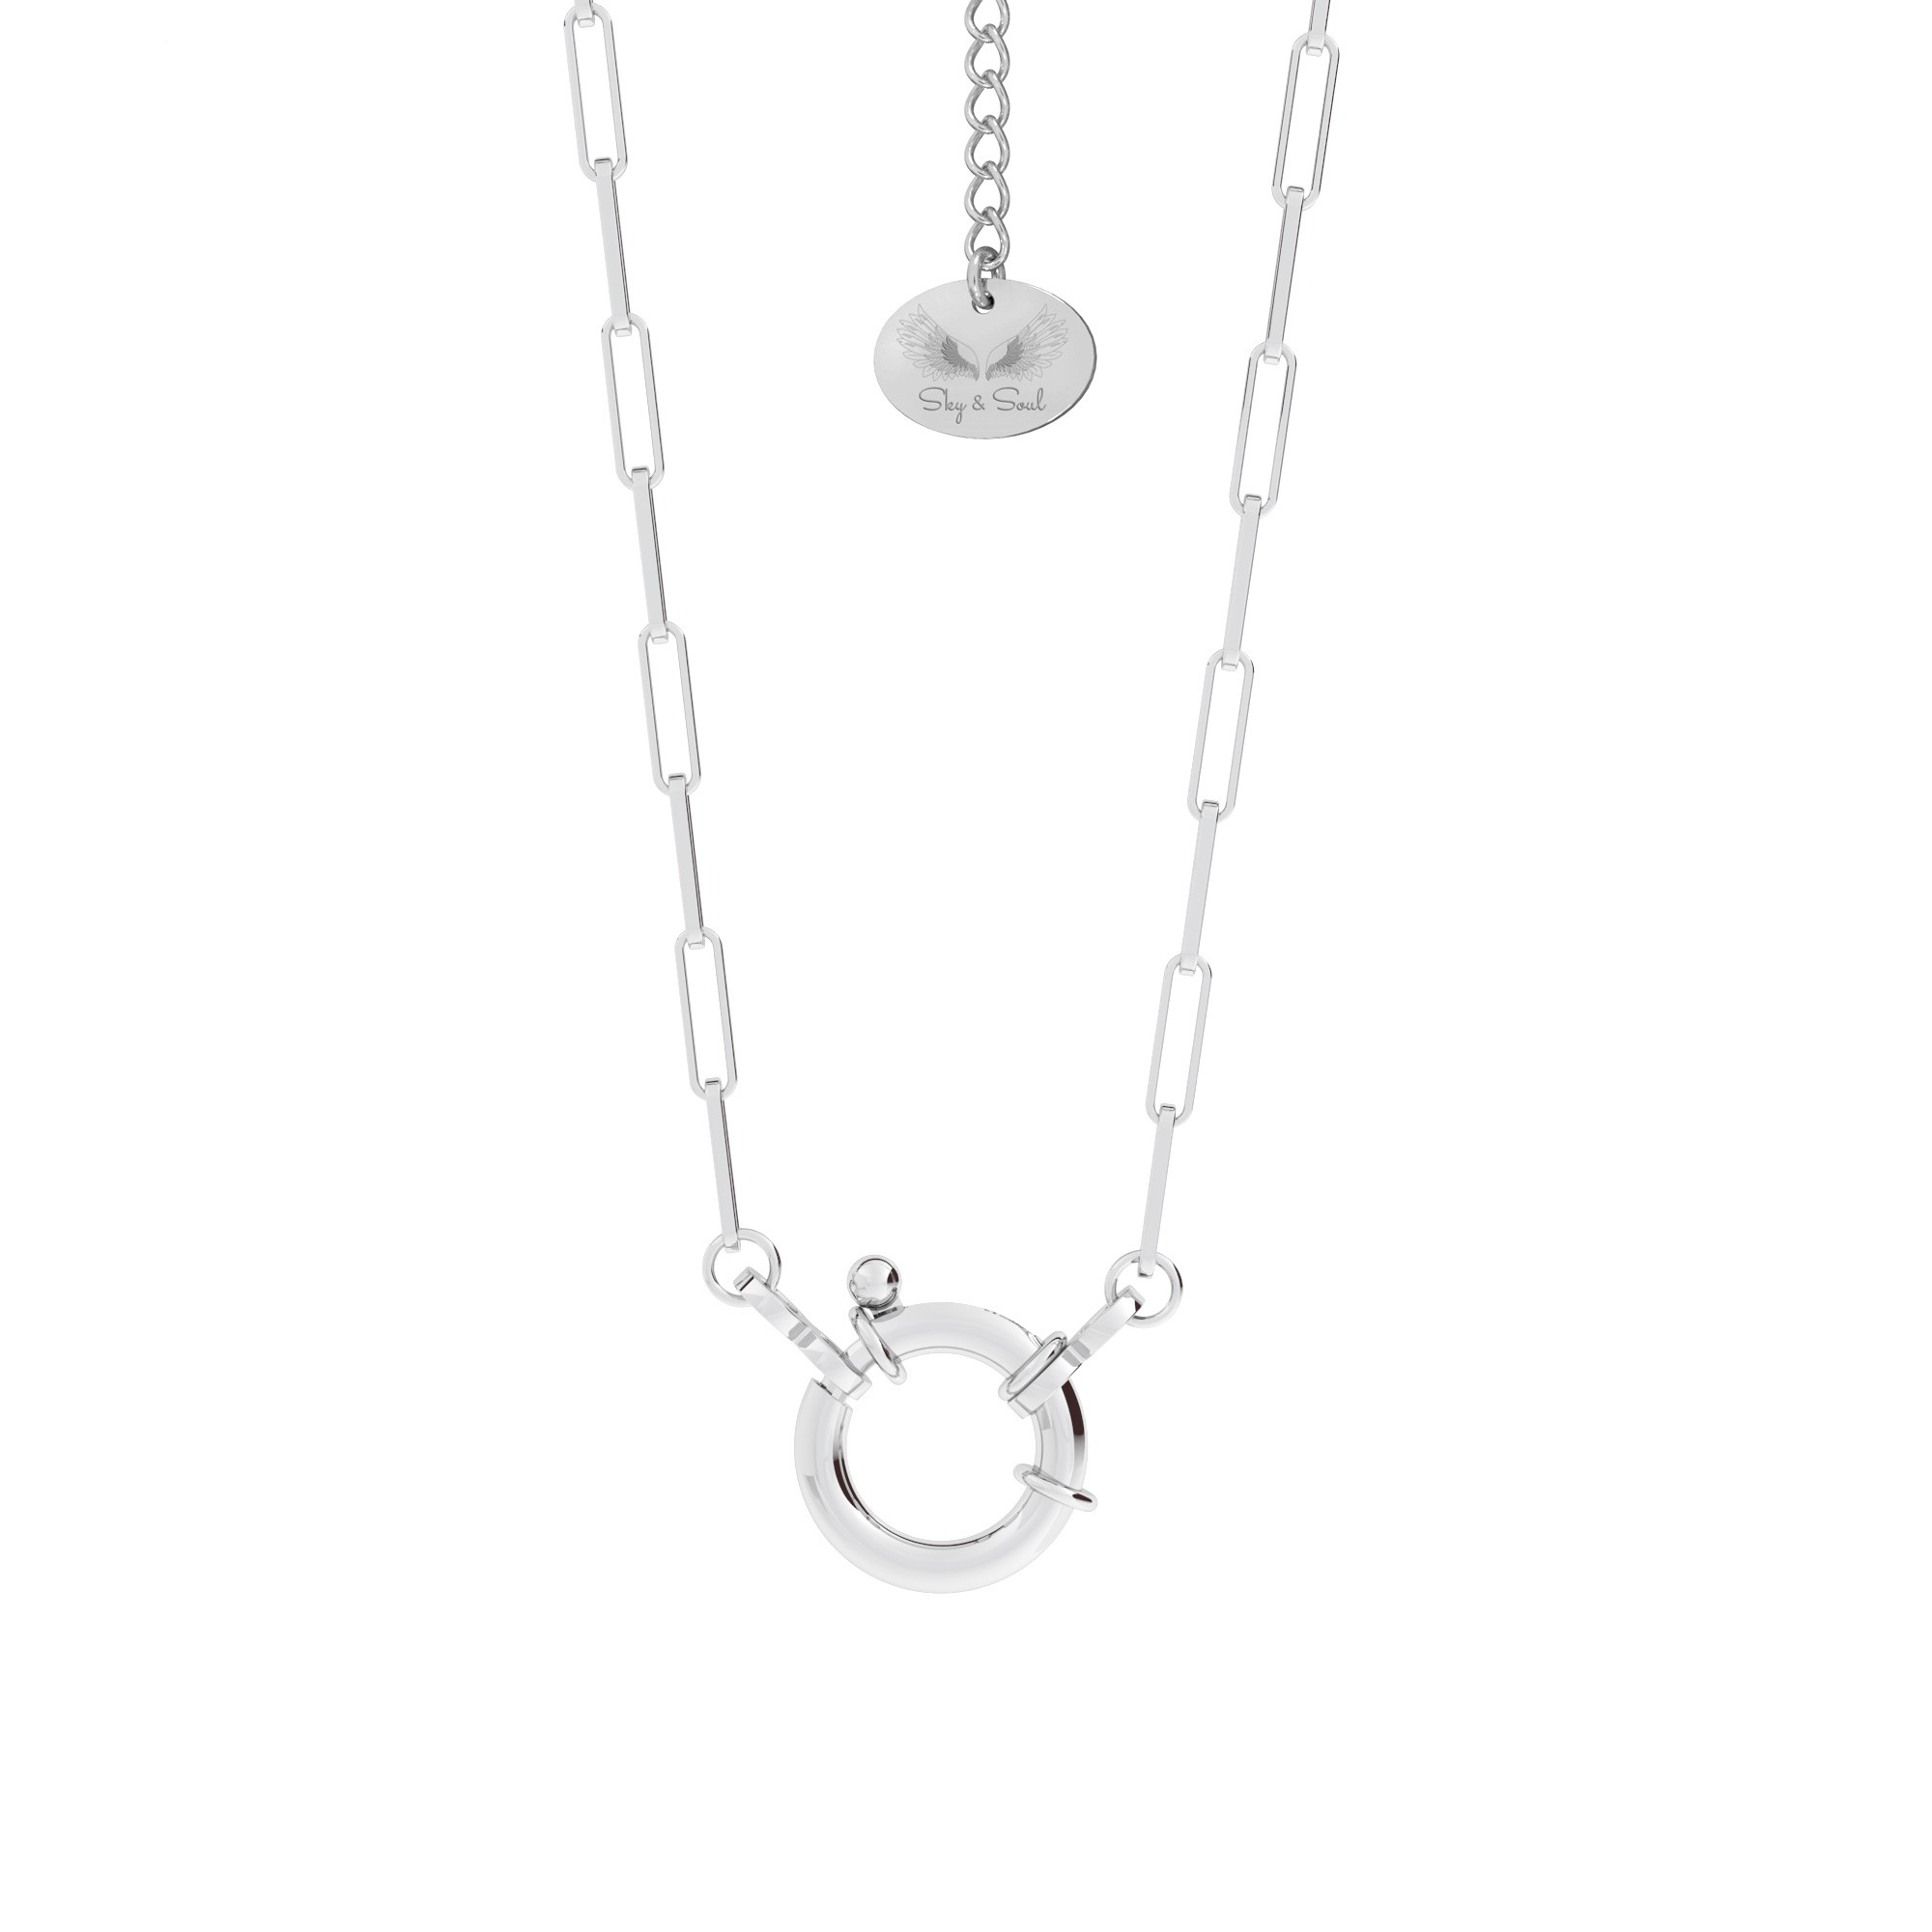 Anchor chain, Sky&Soul, sterling silver 925